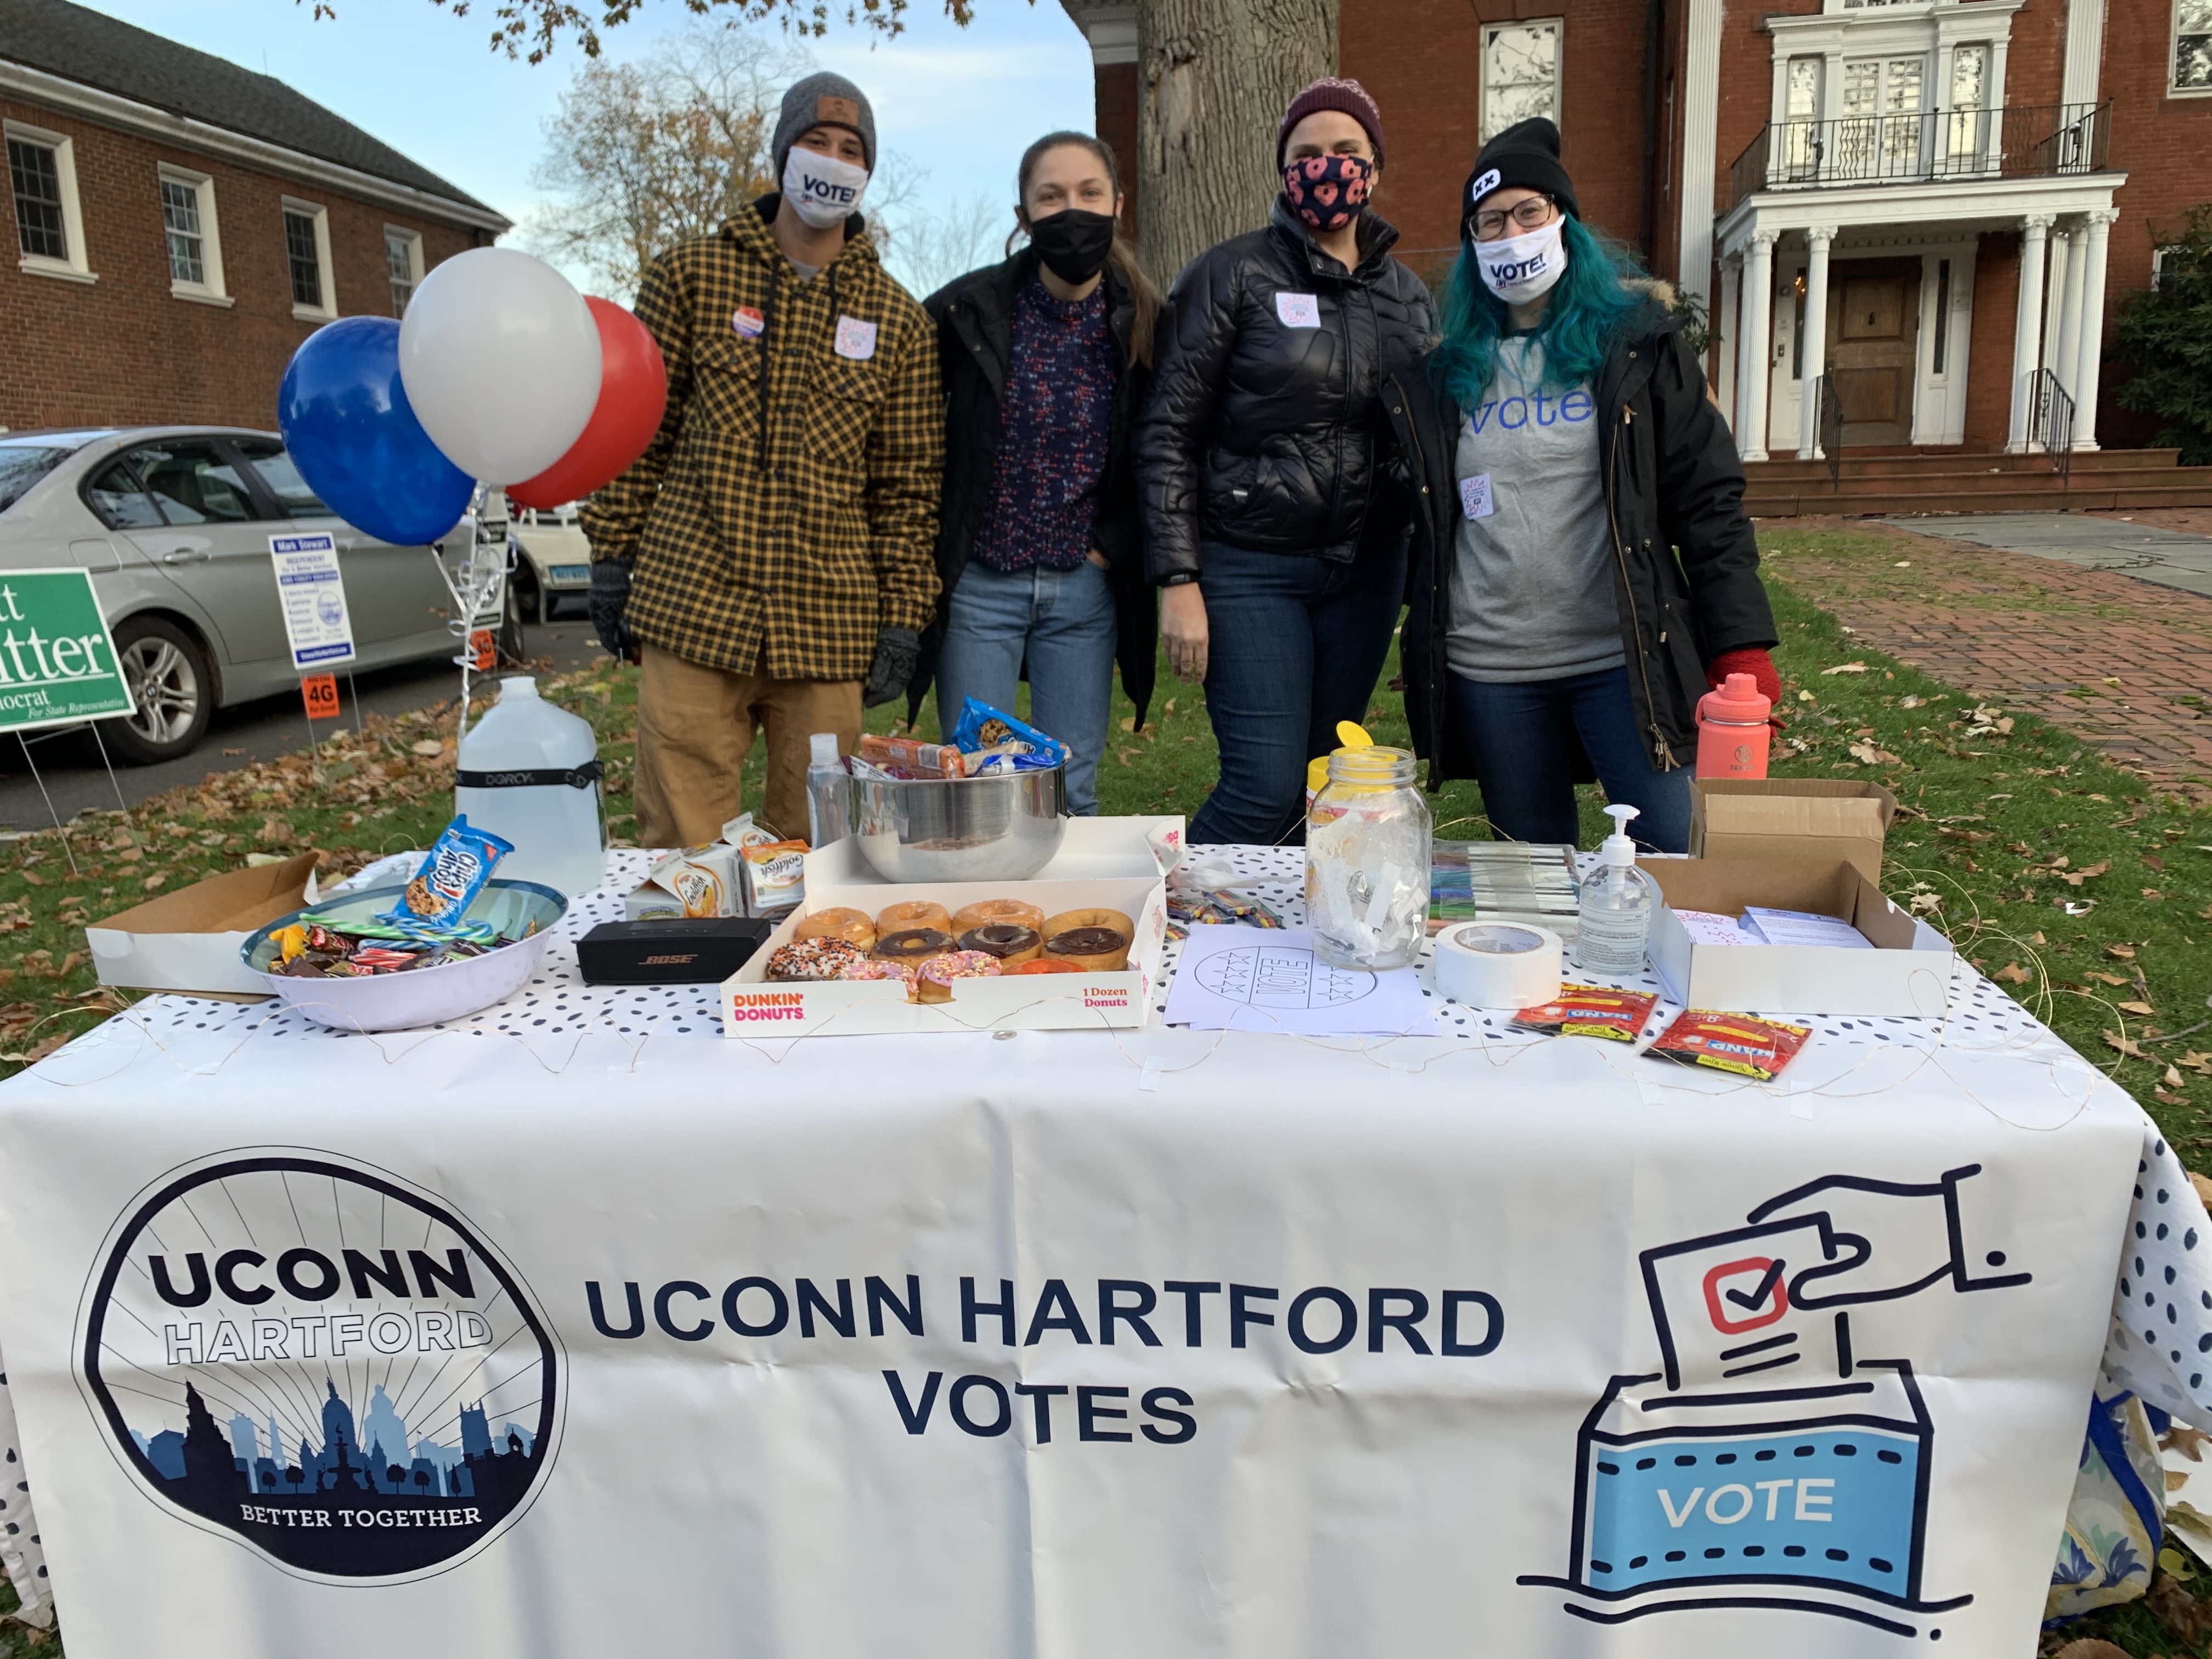 Four people wearing masks stand behind a table with a "UConn Hartford Votes" tablecloth